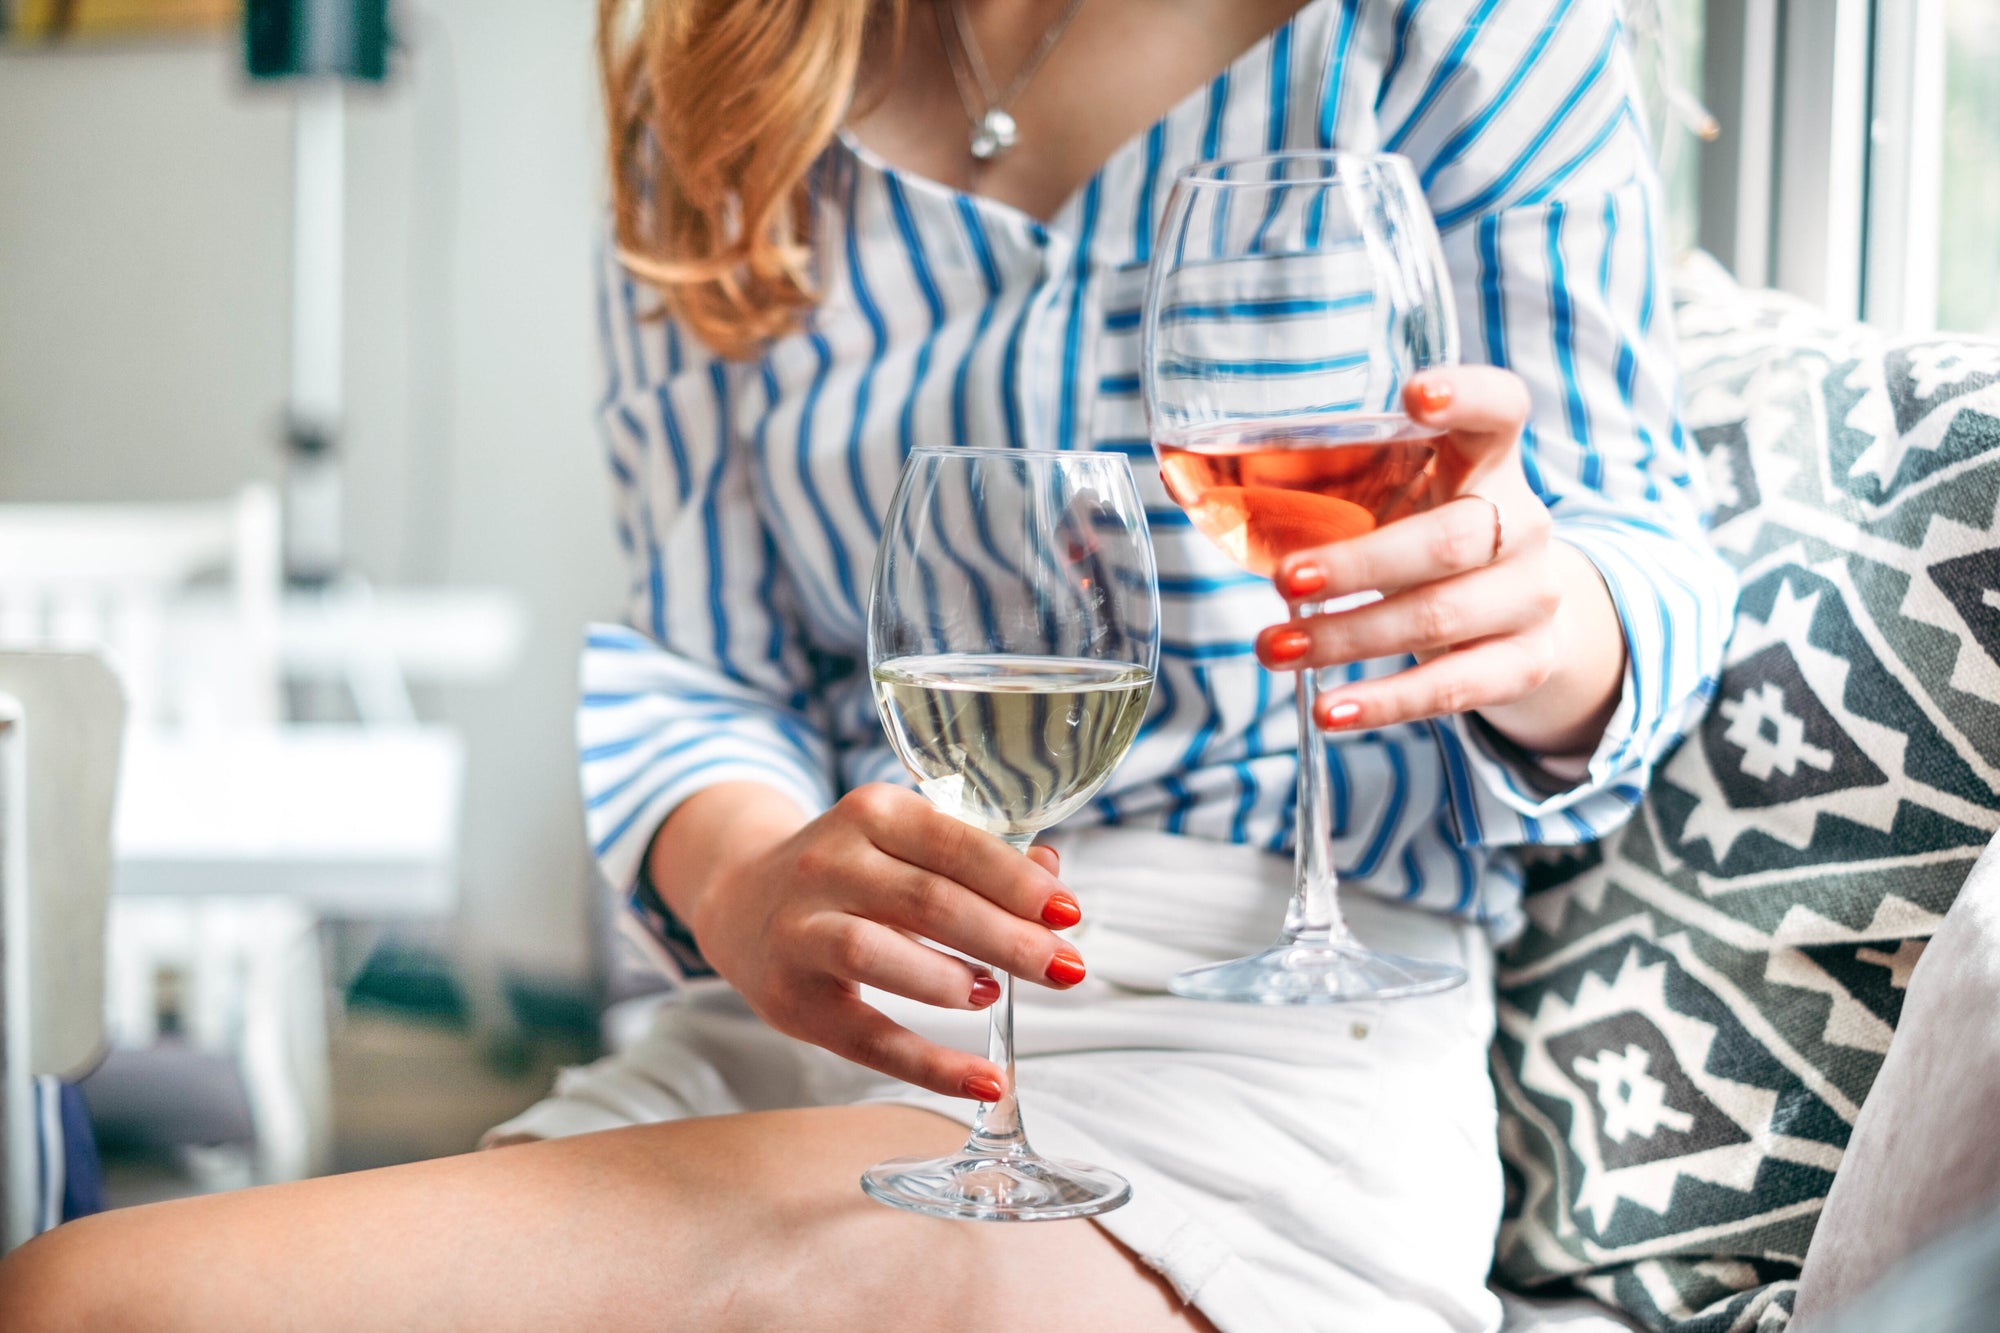 beautiful women sitting on couch holding glass of red and white wine